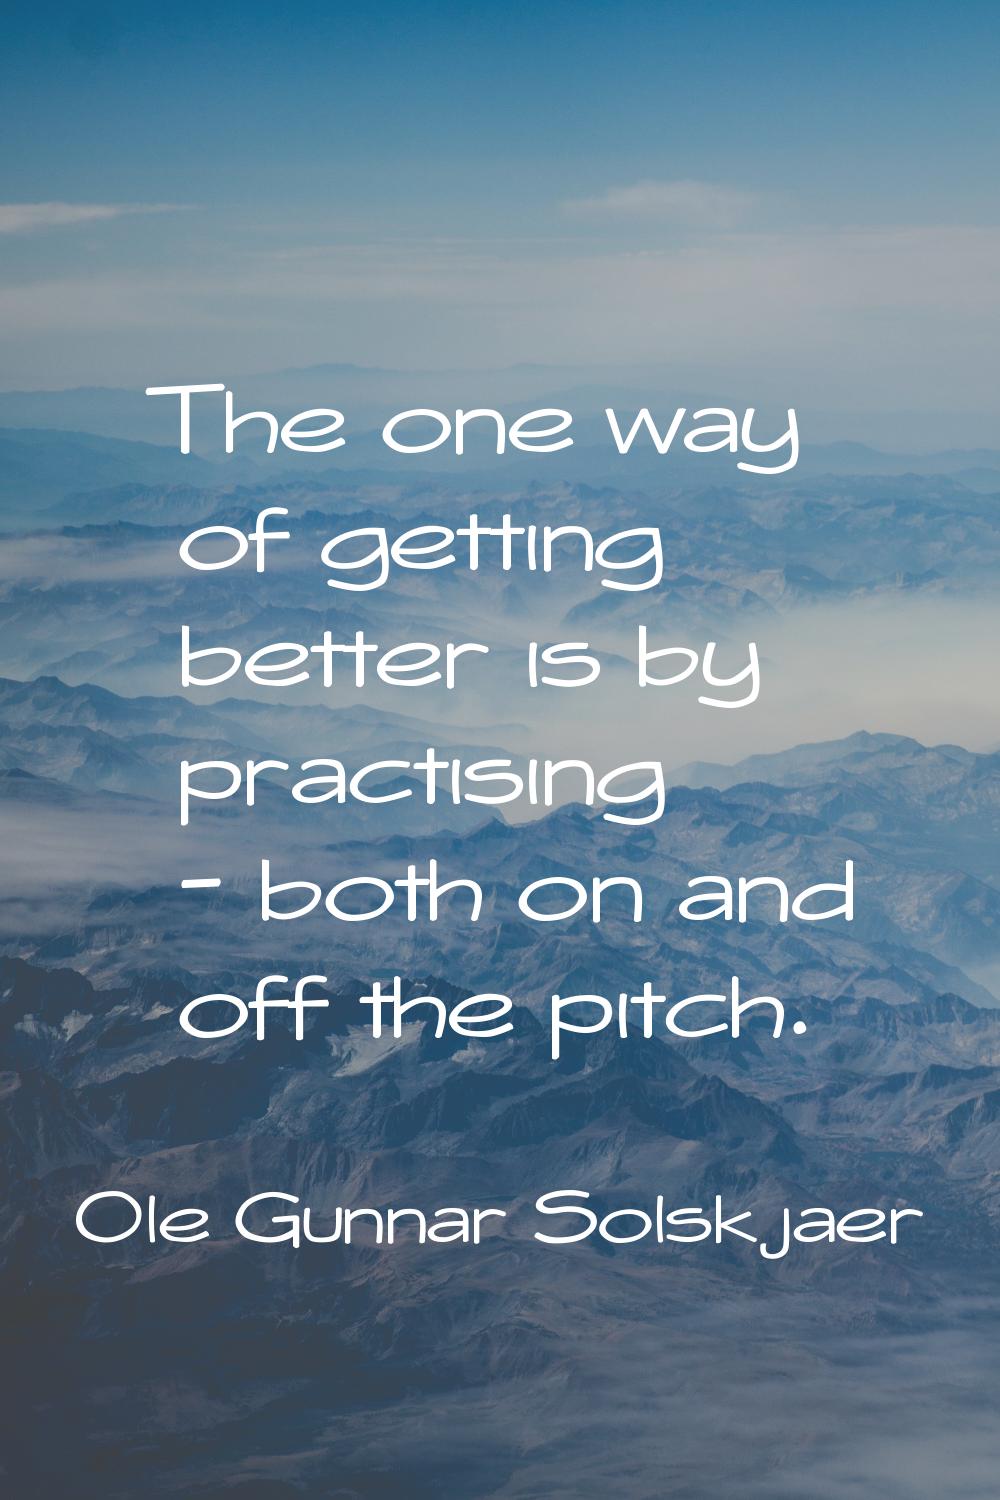 The one way of getting better is by practising - both on and off the pitch.